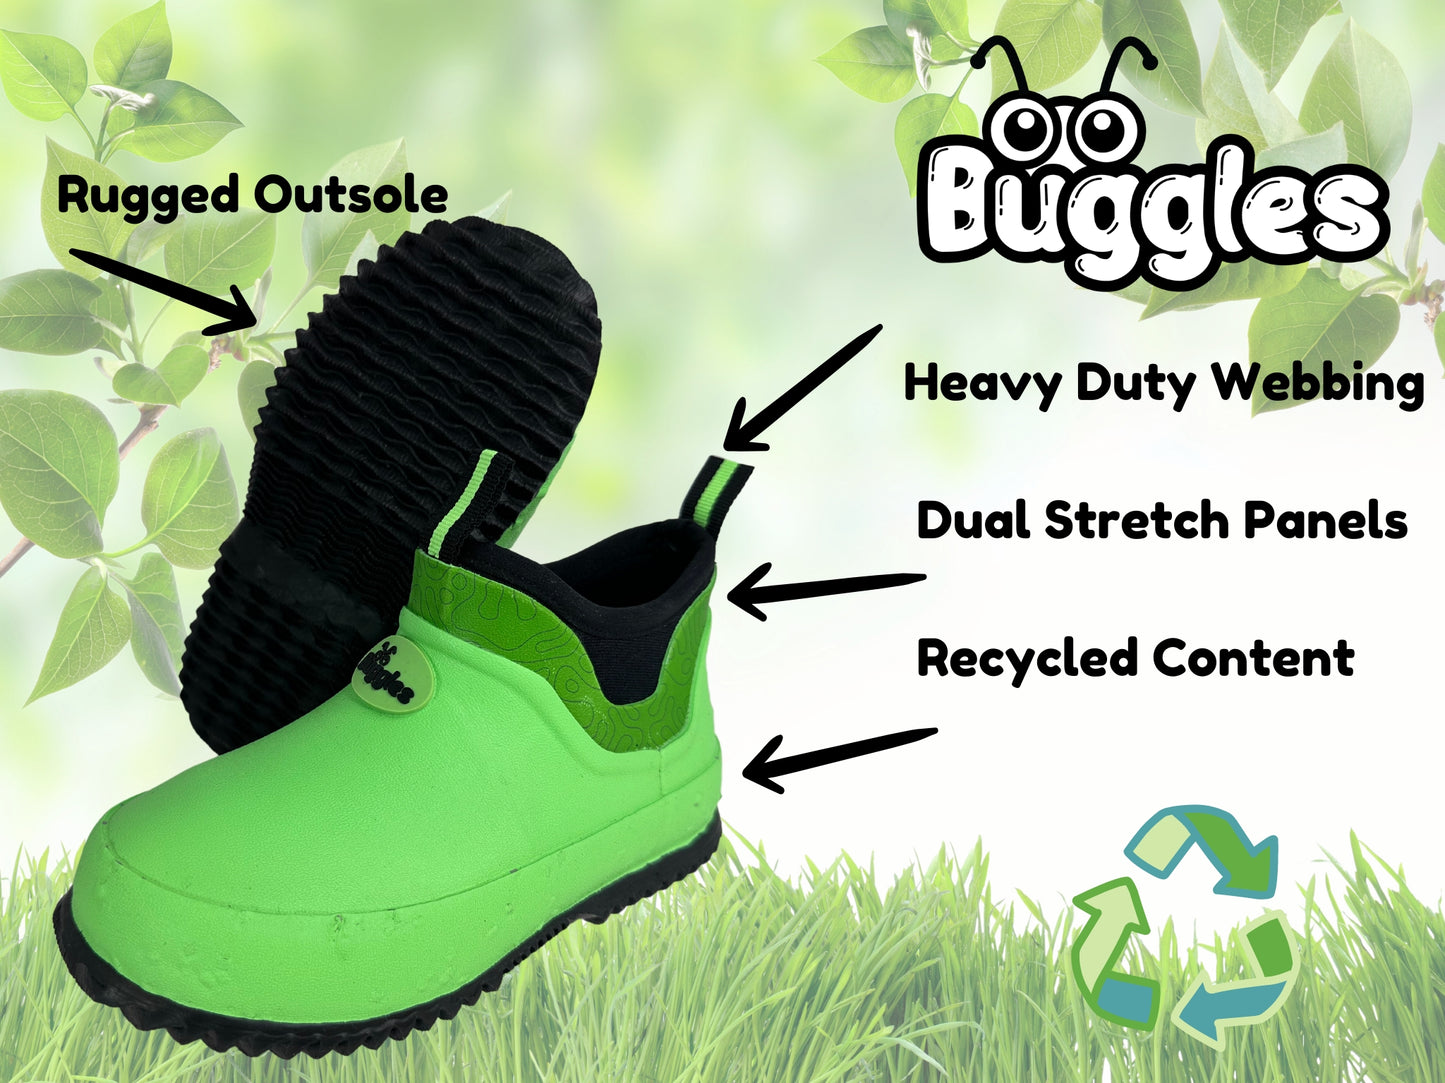 The Original Buggles Boot - The Ultimate Waterproof Ankle Boot For Kids - Neon Green